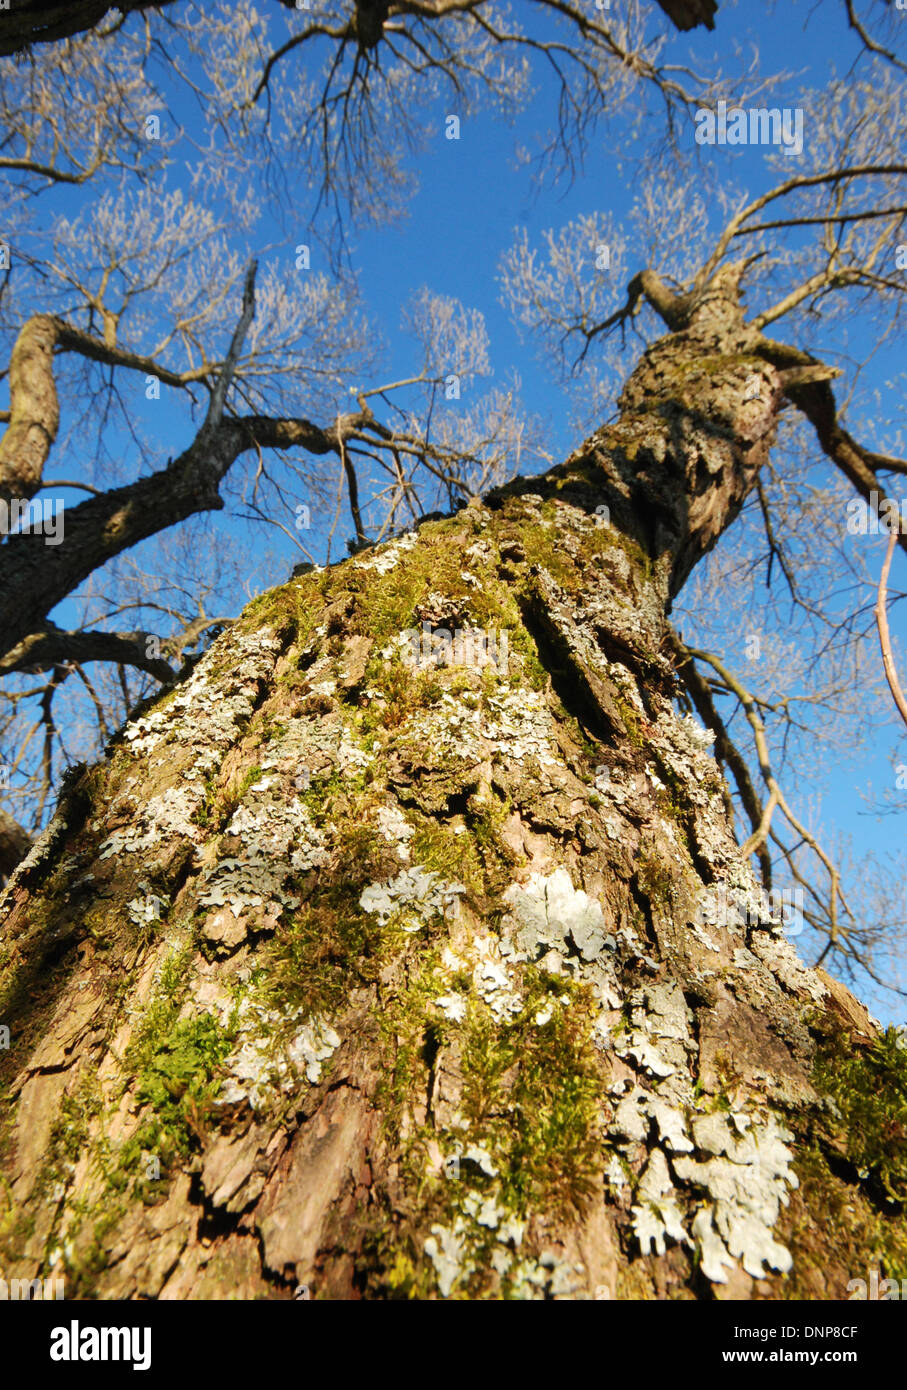 Lichen growing on the bark of an oak tree reaching for the sky Stock Photo